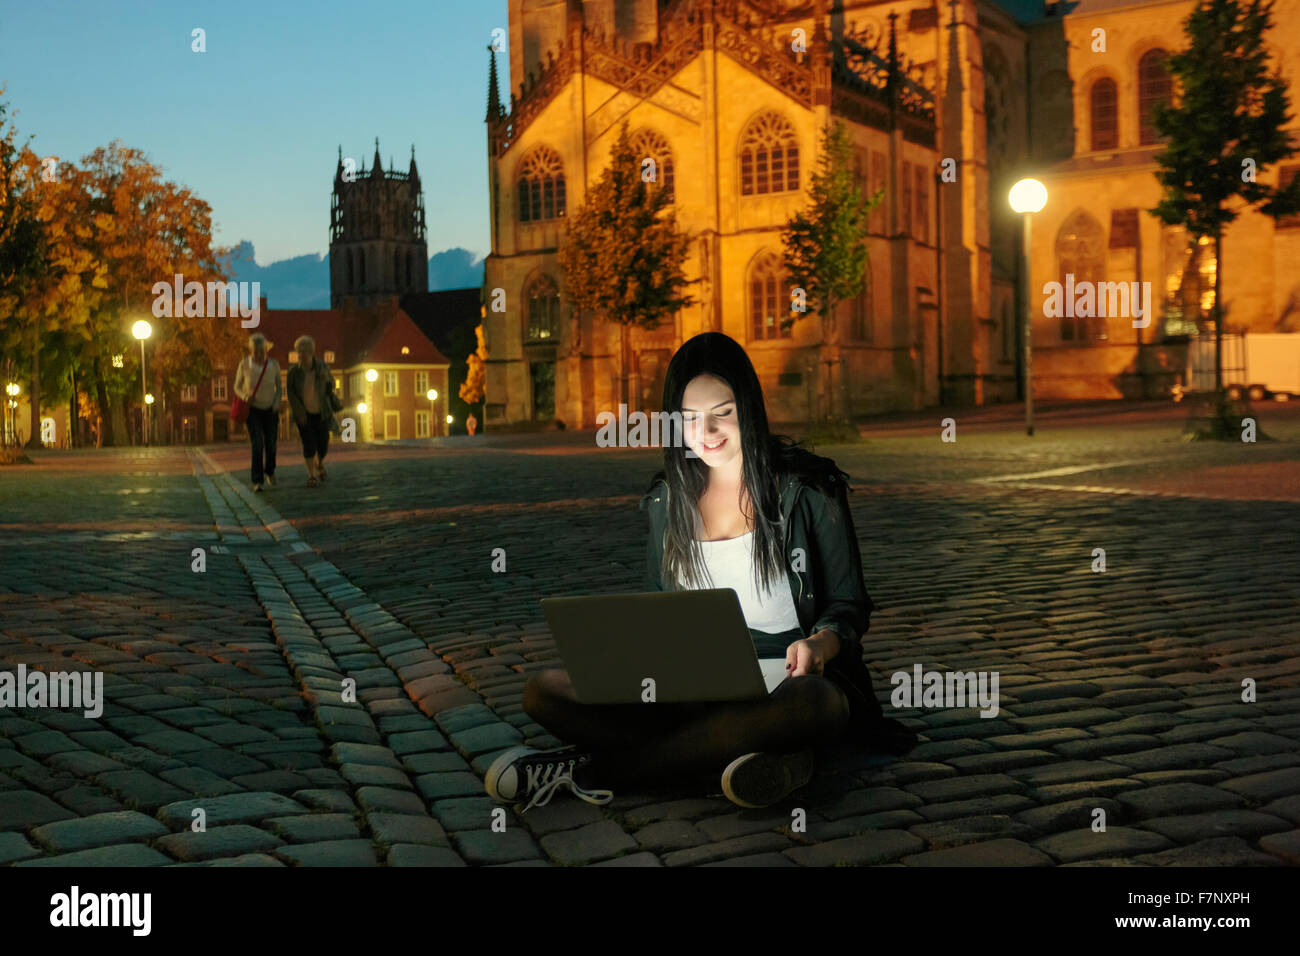 Germany, Muenster, young woman with laptop sitting on pavement in the city at evening Stock Photo